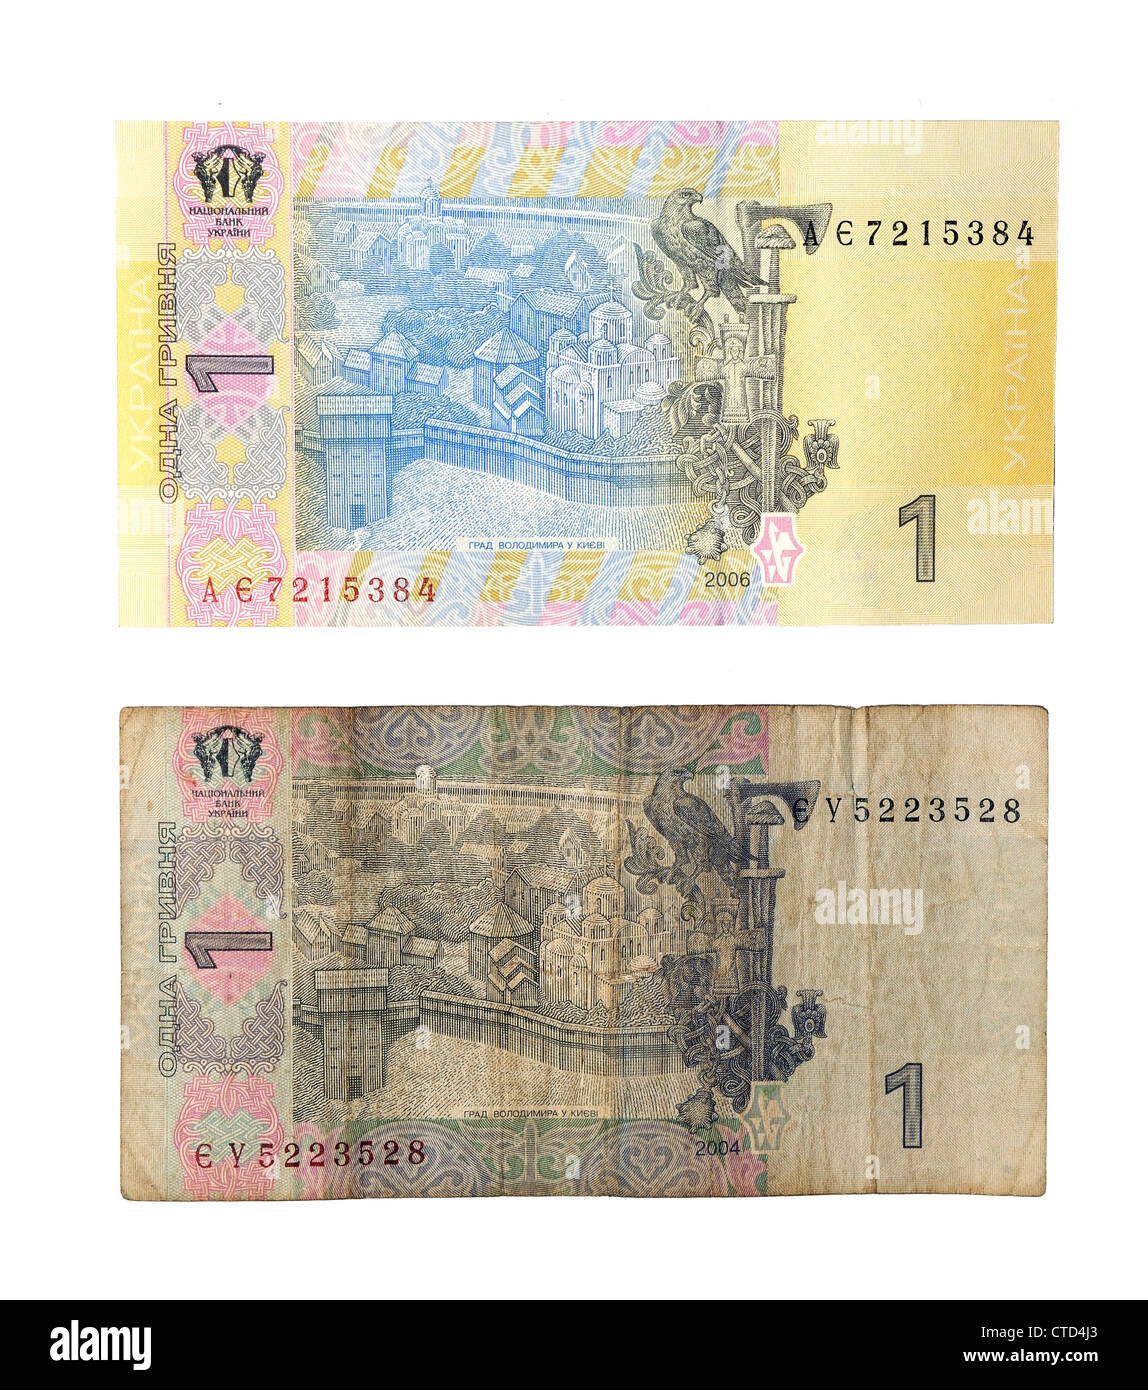 1 Ukrainian hryvnia of a new and old sample (from above note of a new sample) Stock Photo